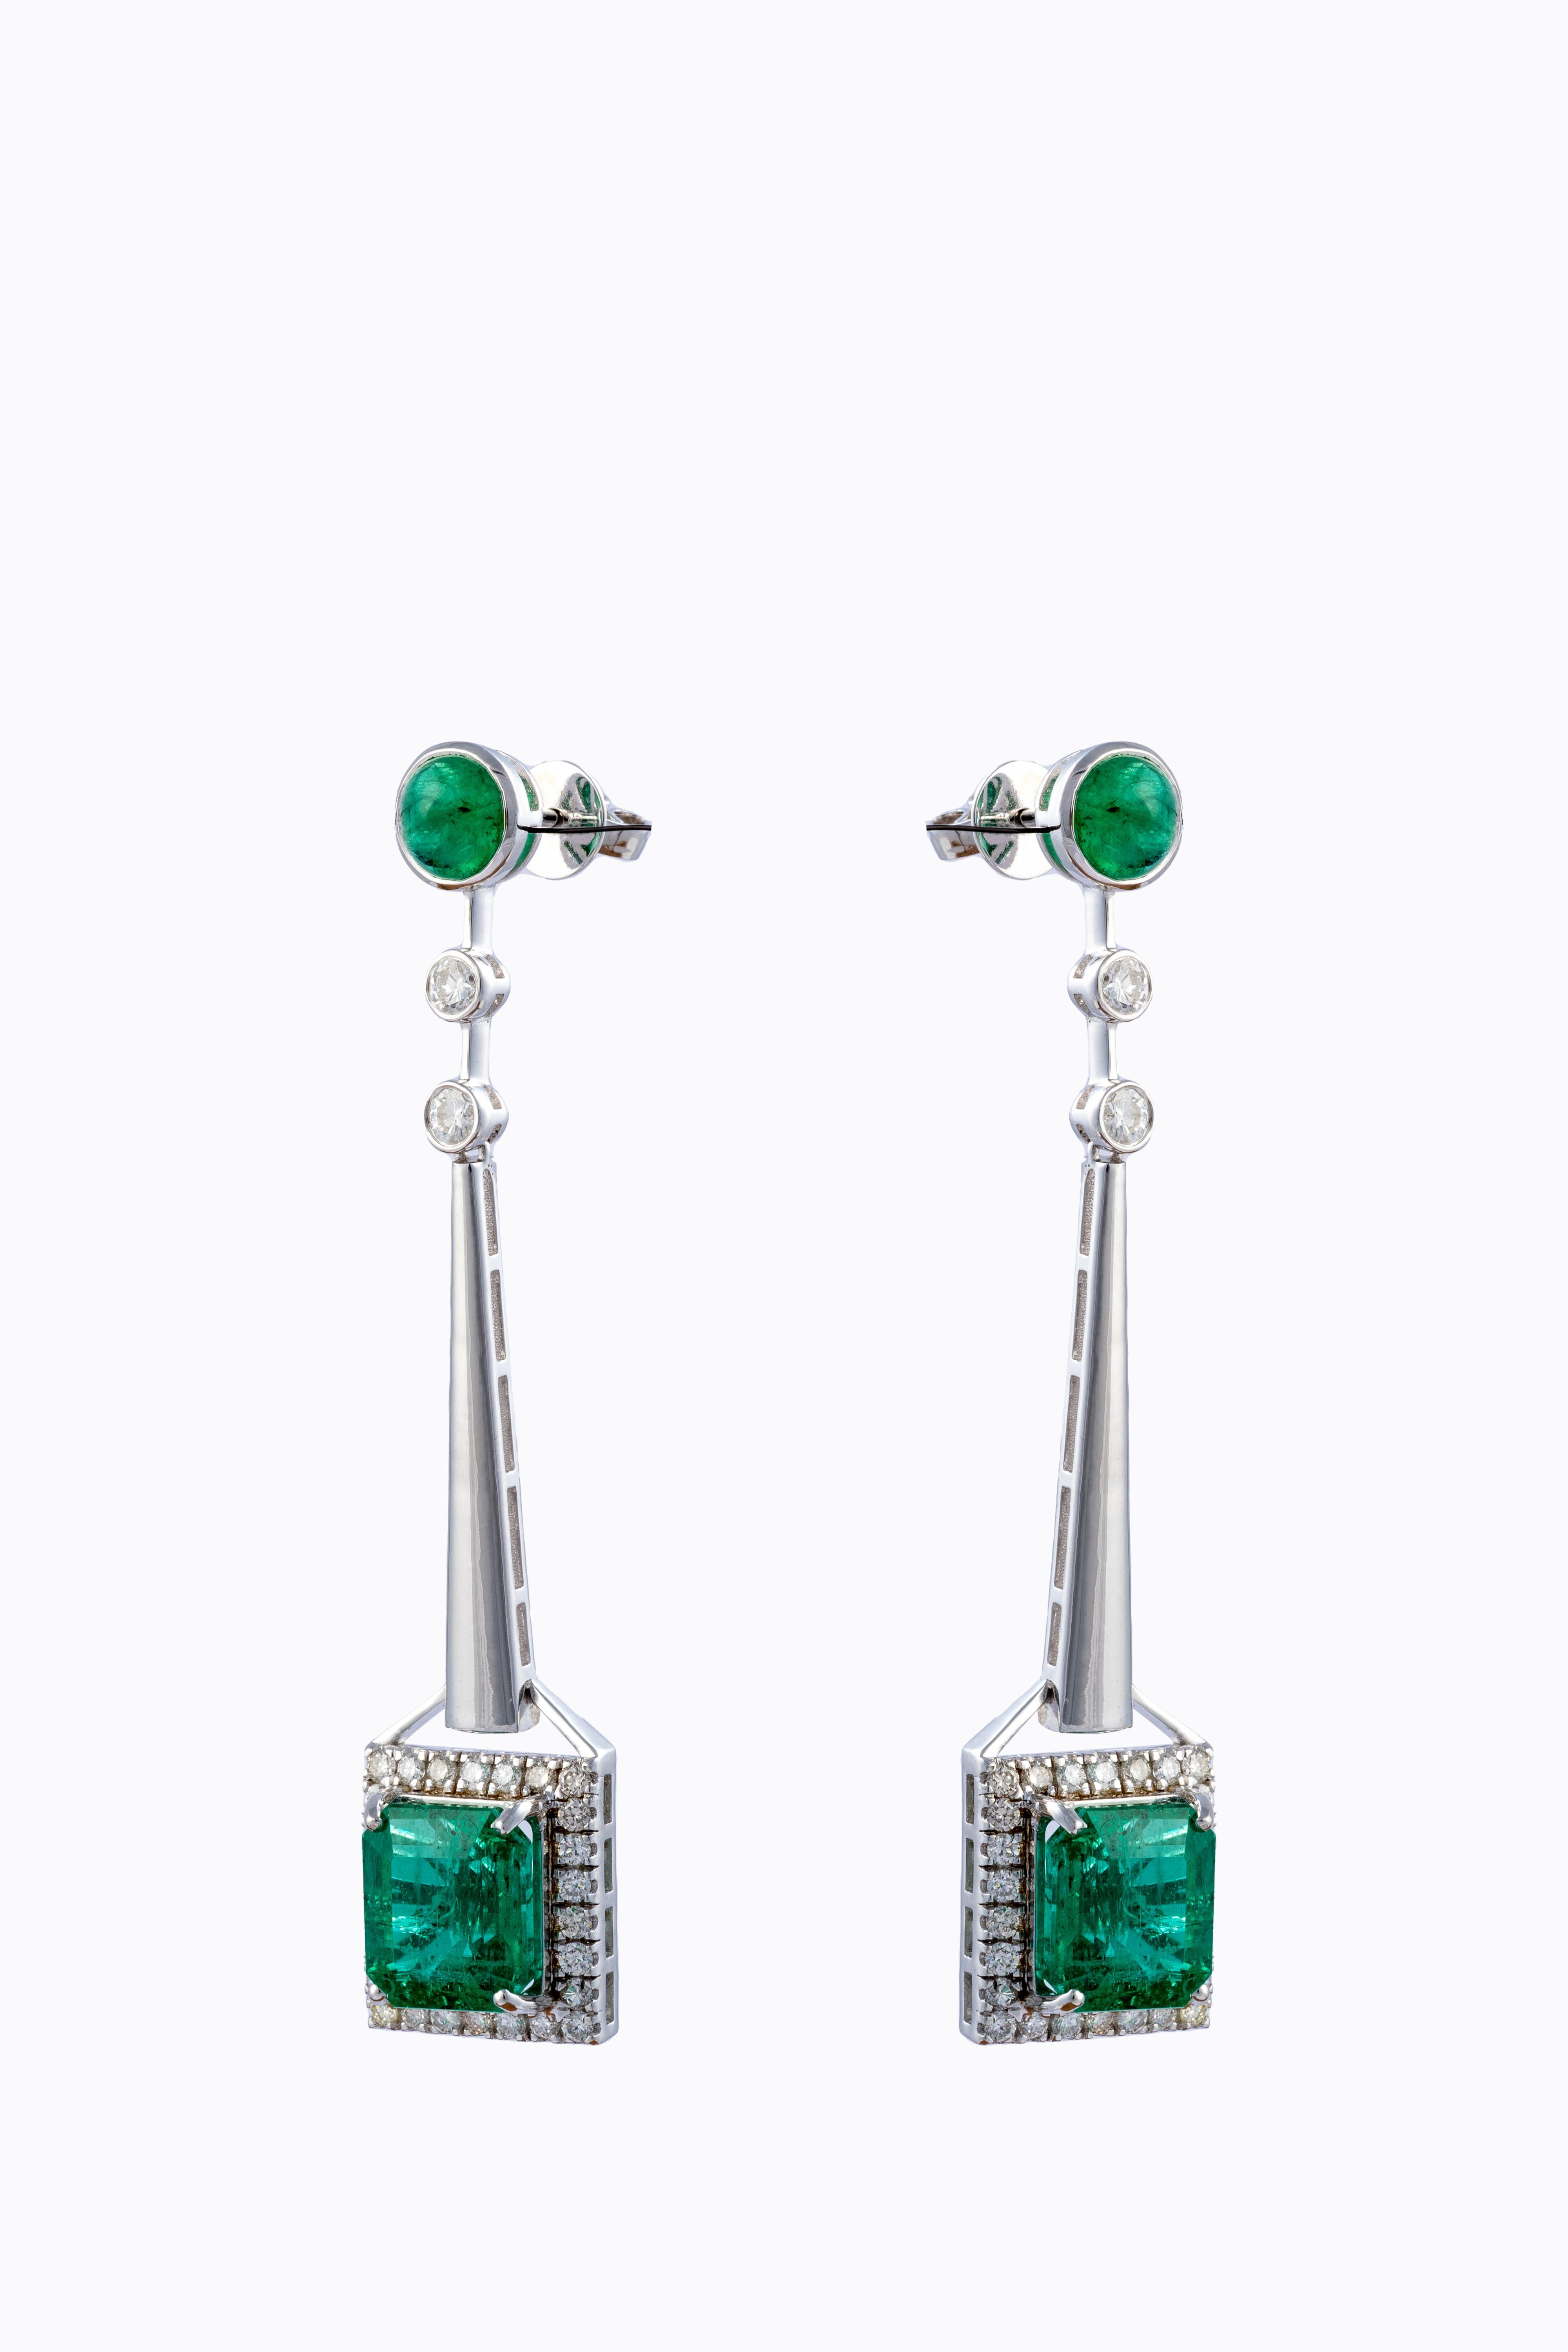 Emerald Cut Natural Zambian Emerald 10.52cts  with Diamonds 1.32cts earring and 14k Gold For Sale